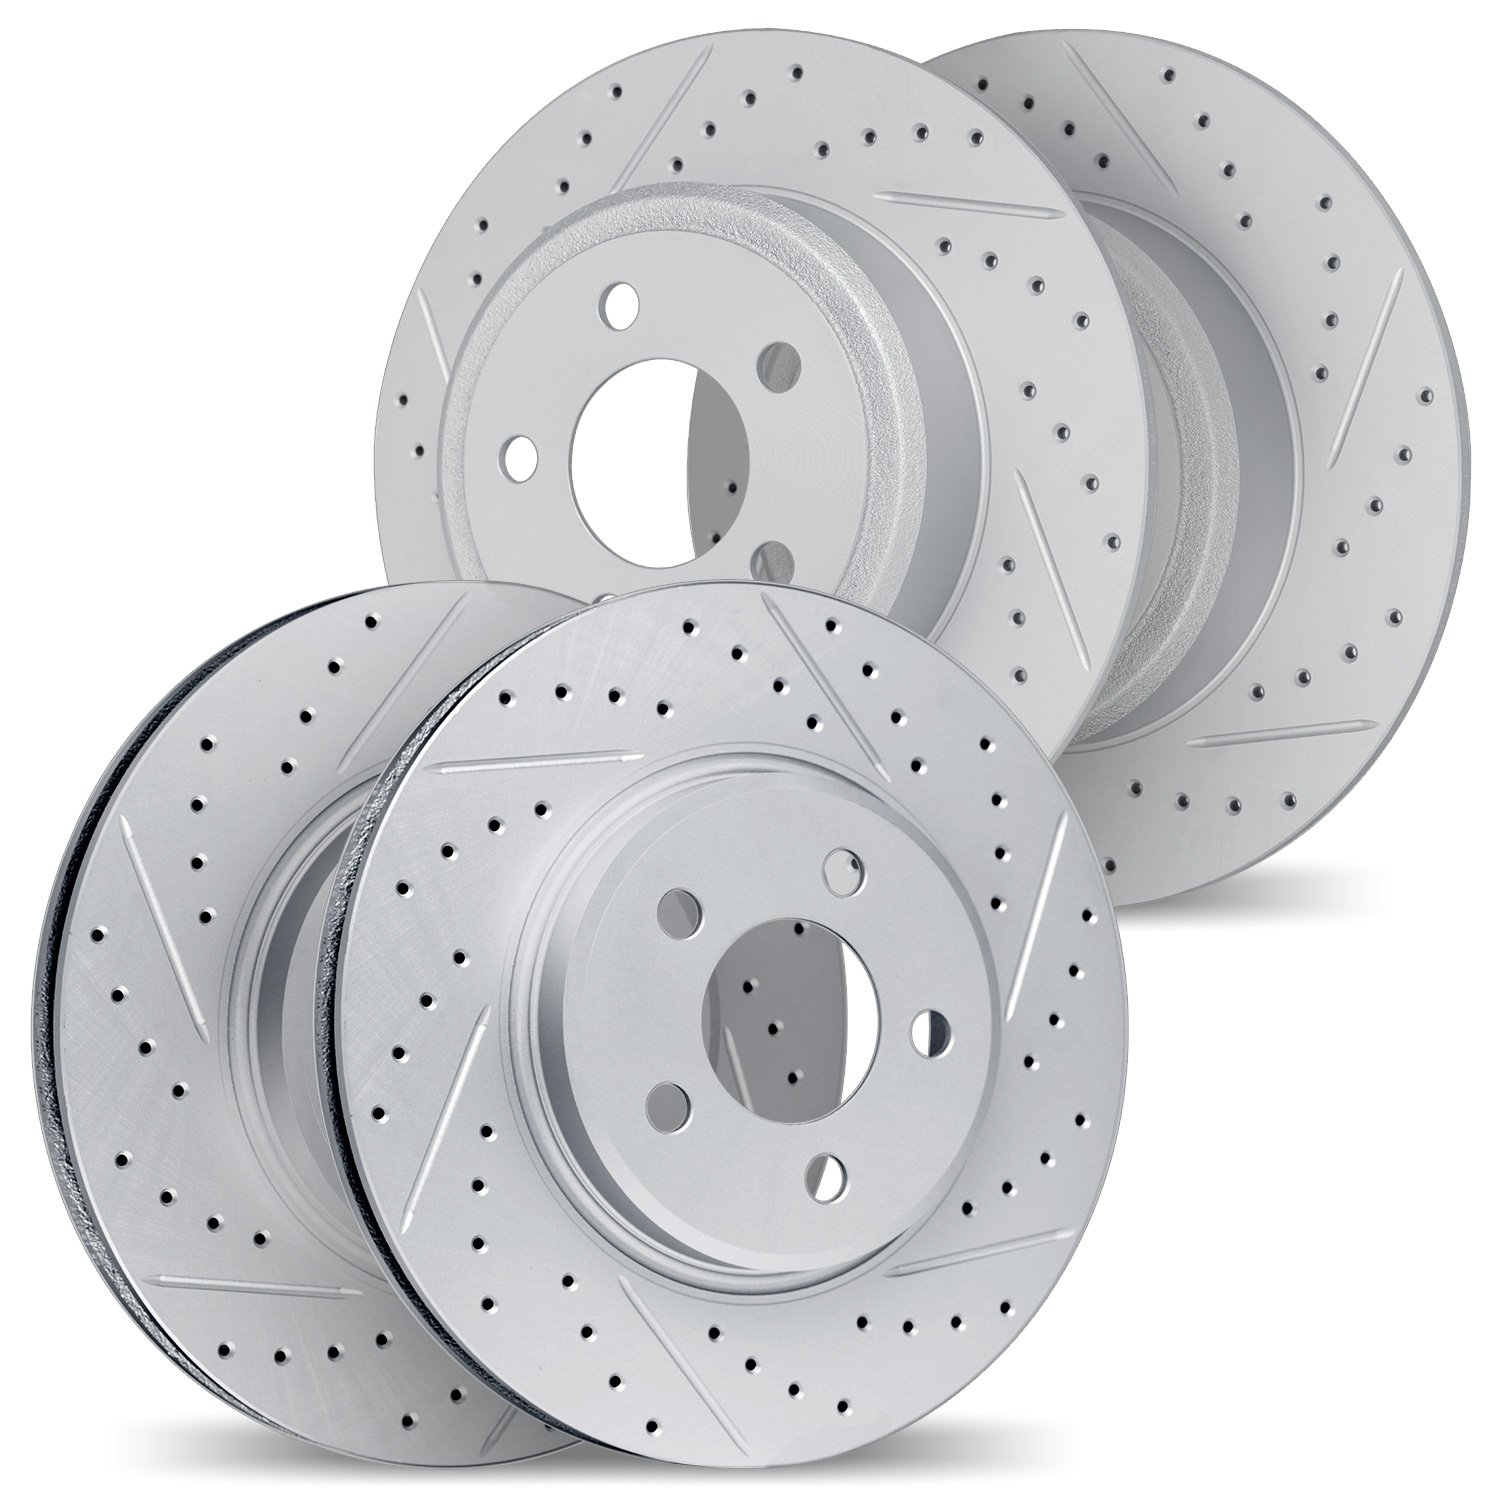 2004-47007 Geoperformance Drilled/Slotted Brake Rotors, 2005-2005 GM, Position: Front and Rear